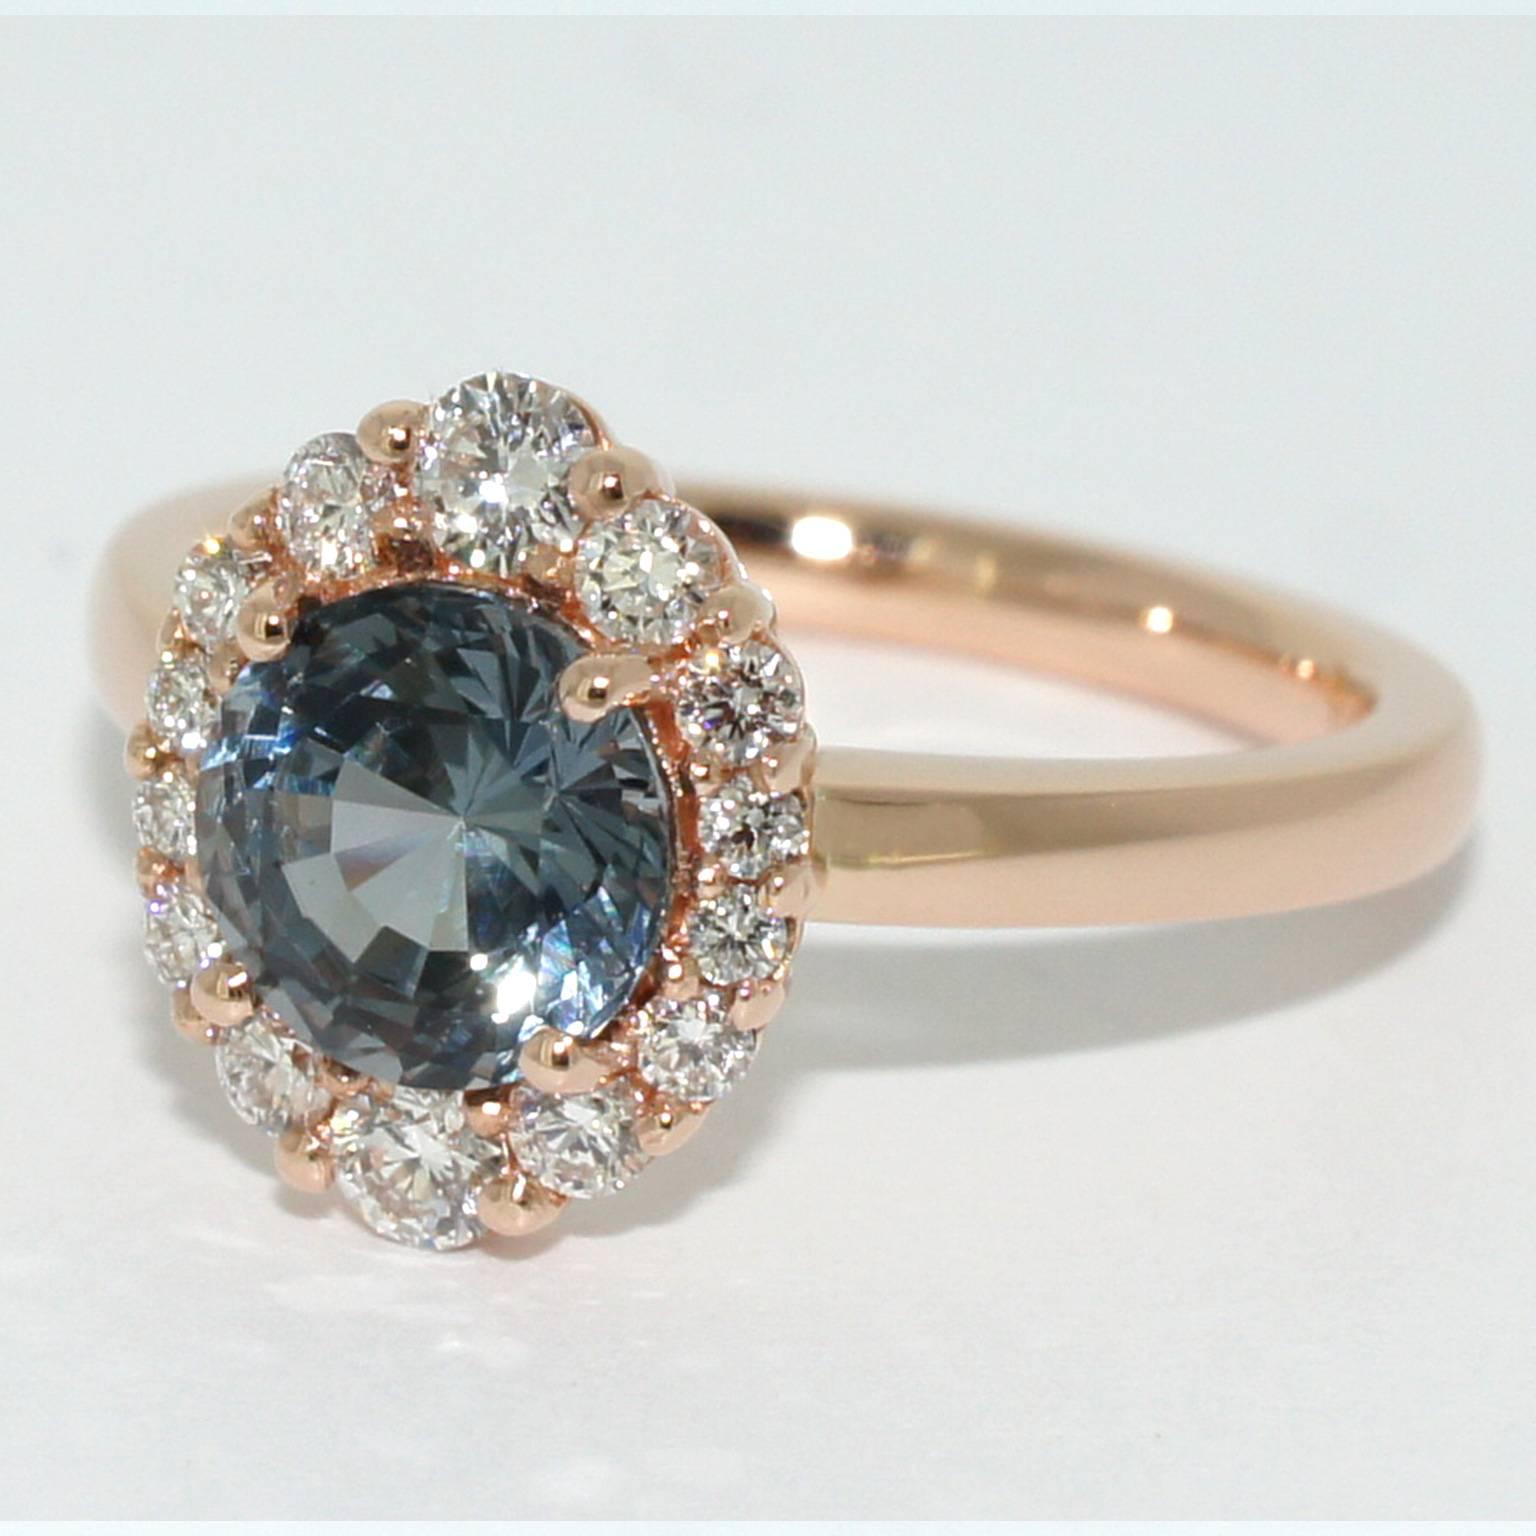 This gorgeous, feminine engagement ring is a modern take on a classic design. With a beautiful, sparkling 1 carat grey spinel as a central stone and 14 F VS diamonds in the halo, this contemporary engagement ring is made to order in our Sydney